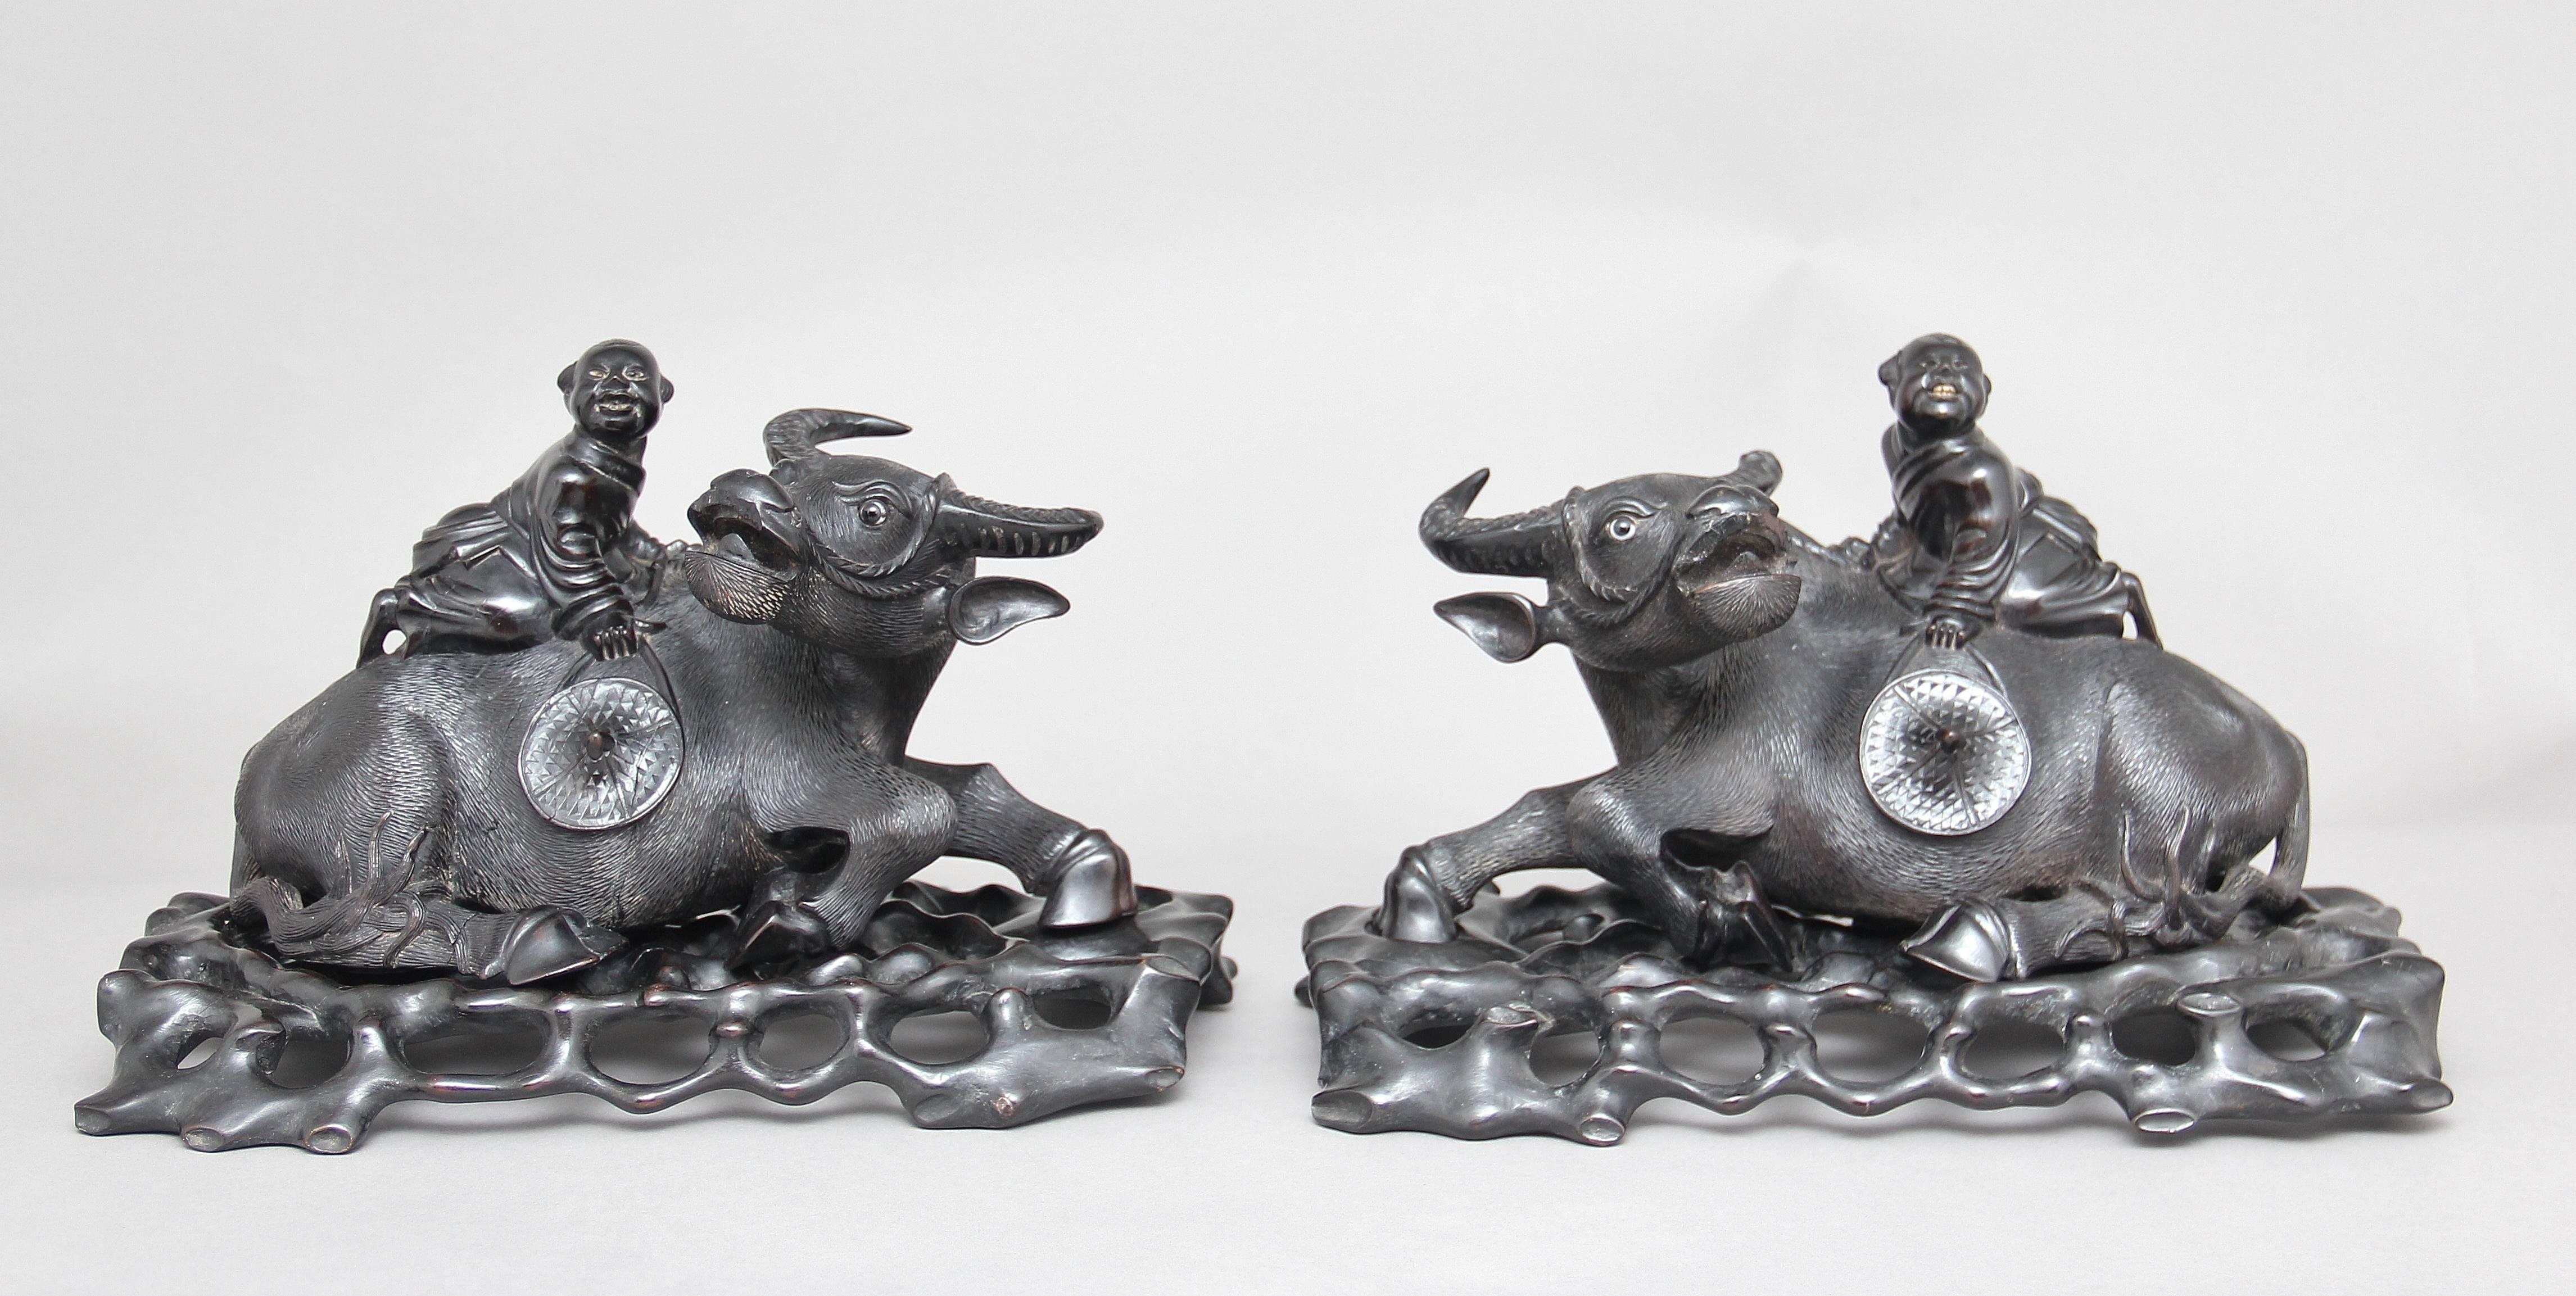 A pair of 20th century Chinese wood carvings of a boy on the back of a water buffalo holding a hat, the water buffalo standing on the original carved and pierced naturalistic stands, carved from an ebonised hardwood. There is some minor damage in